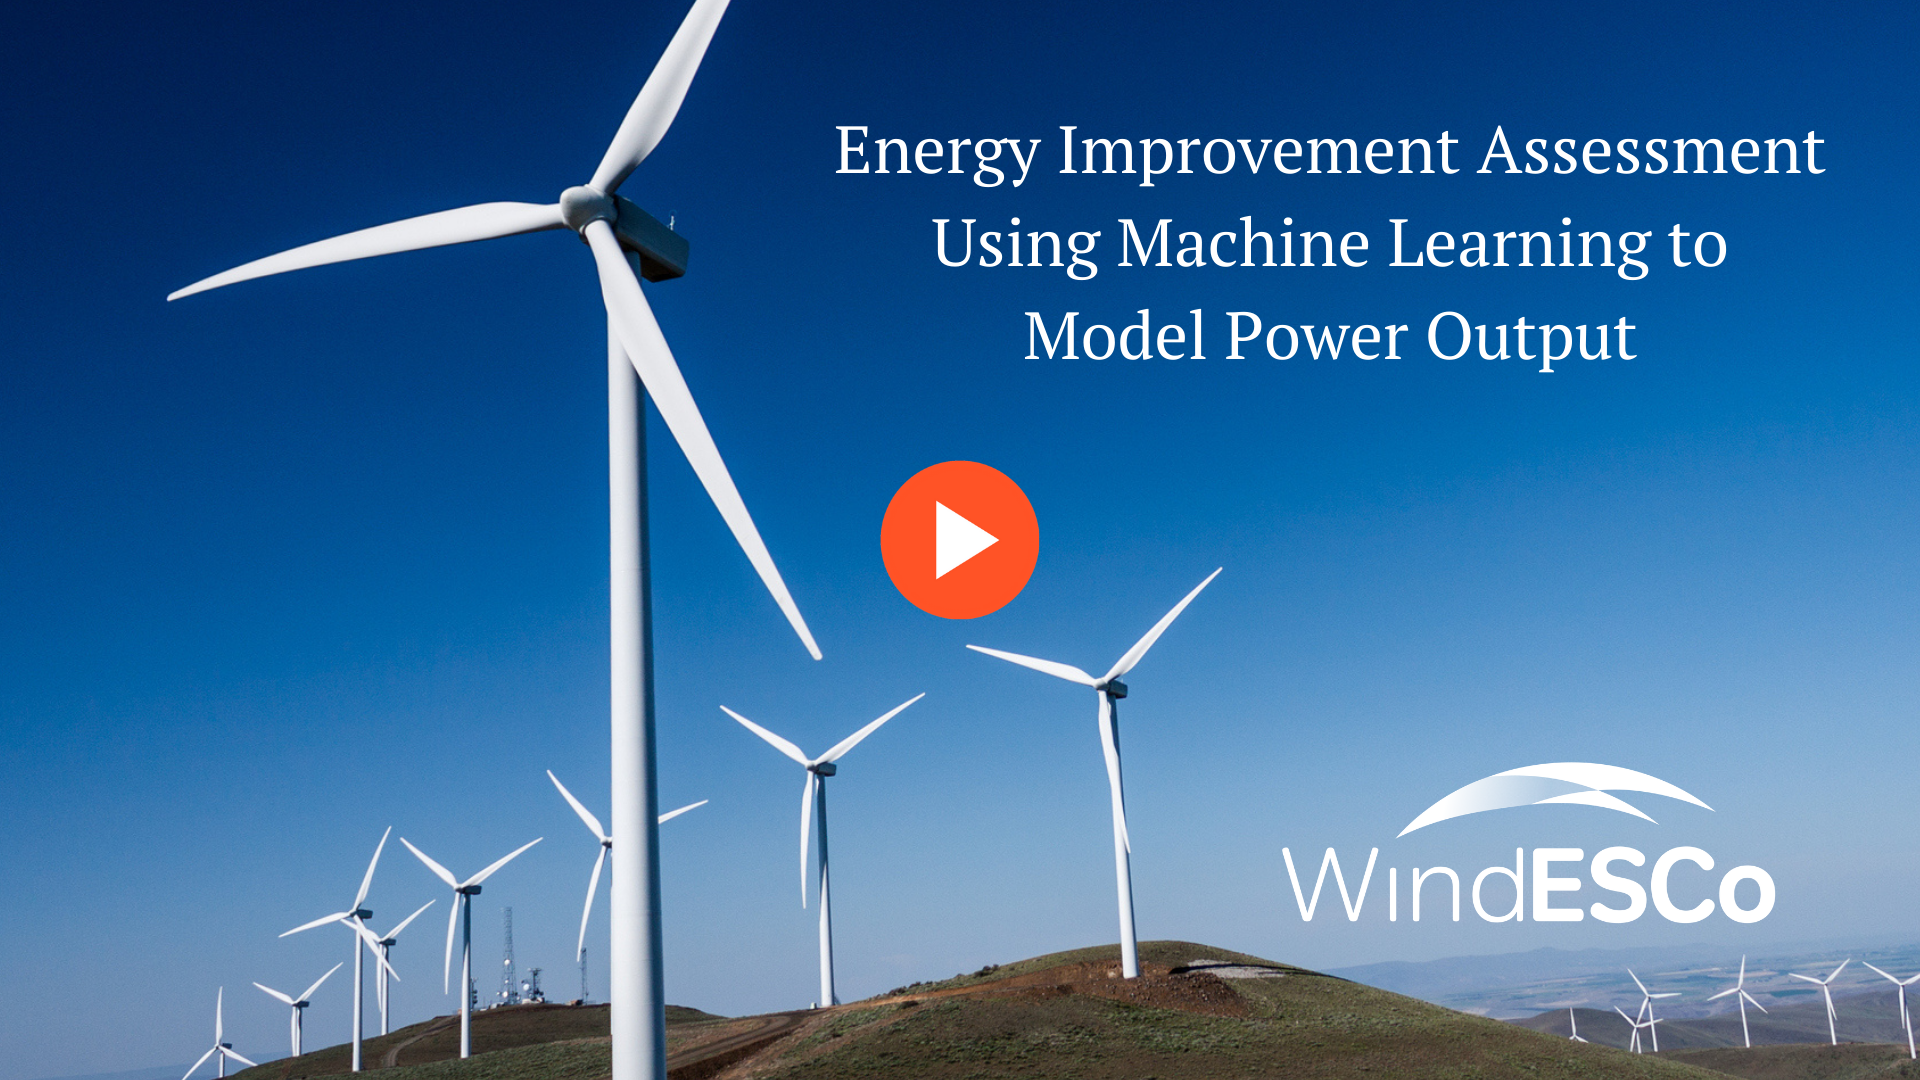 Energy Improvement Assessment Using Machine Learning to Model Power Output